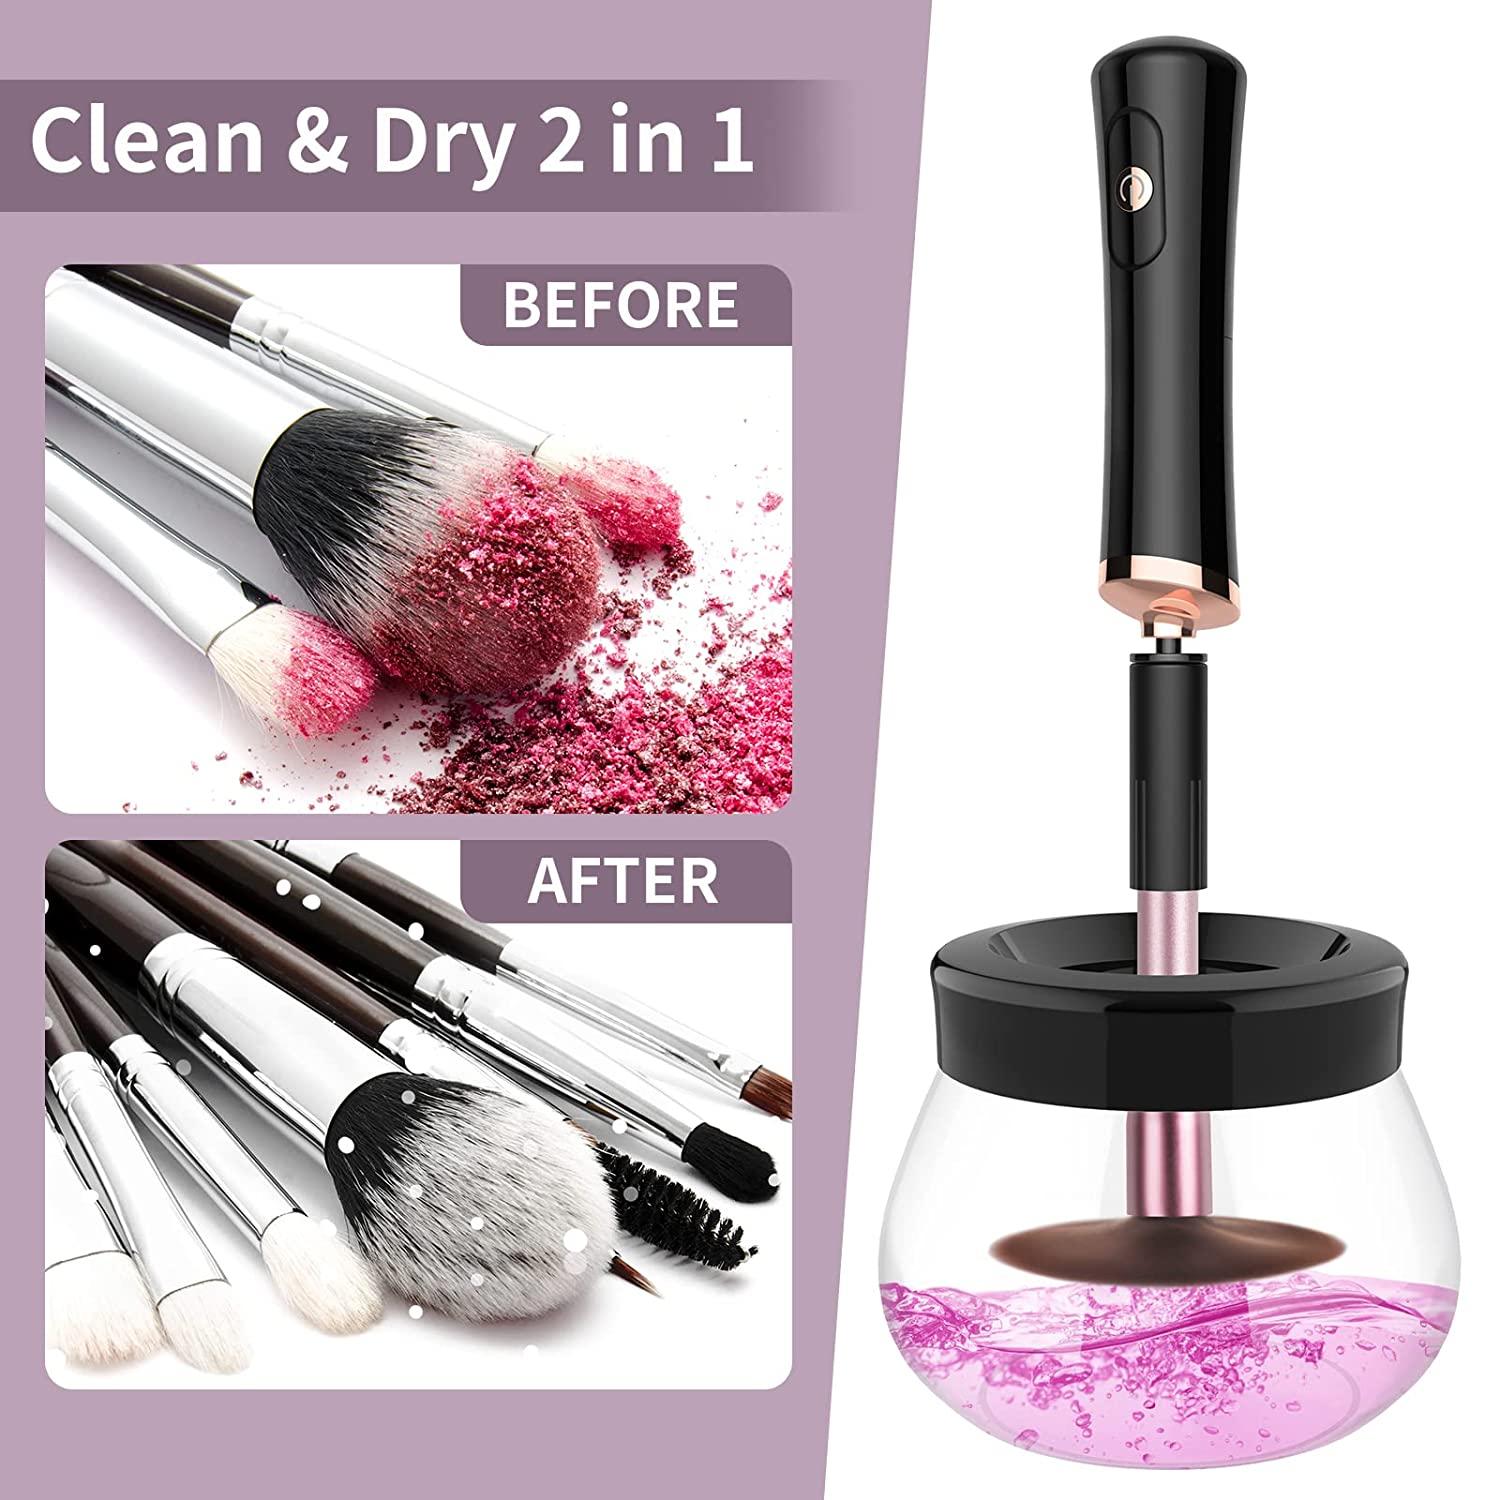 Makeup Brush Cleaner Dryer, Makeup Brush Cleaner Machine With 8 Rubber